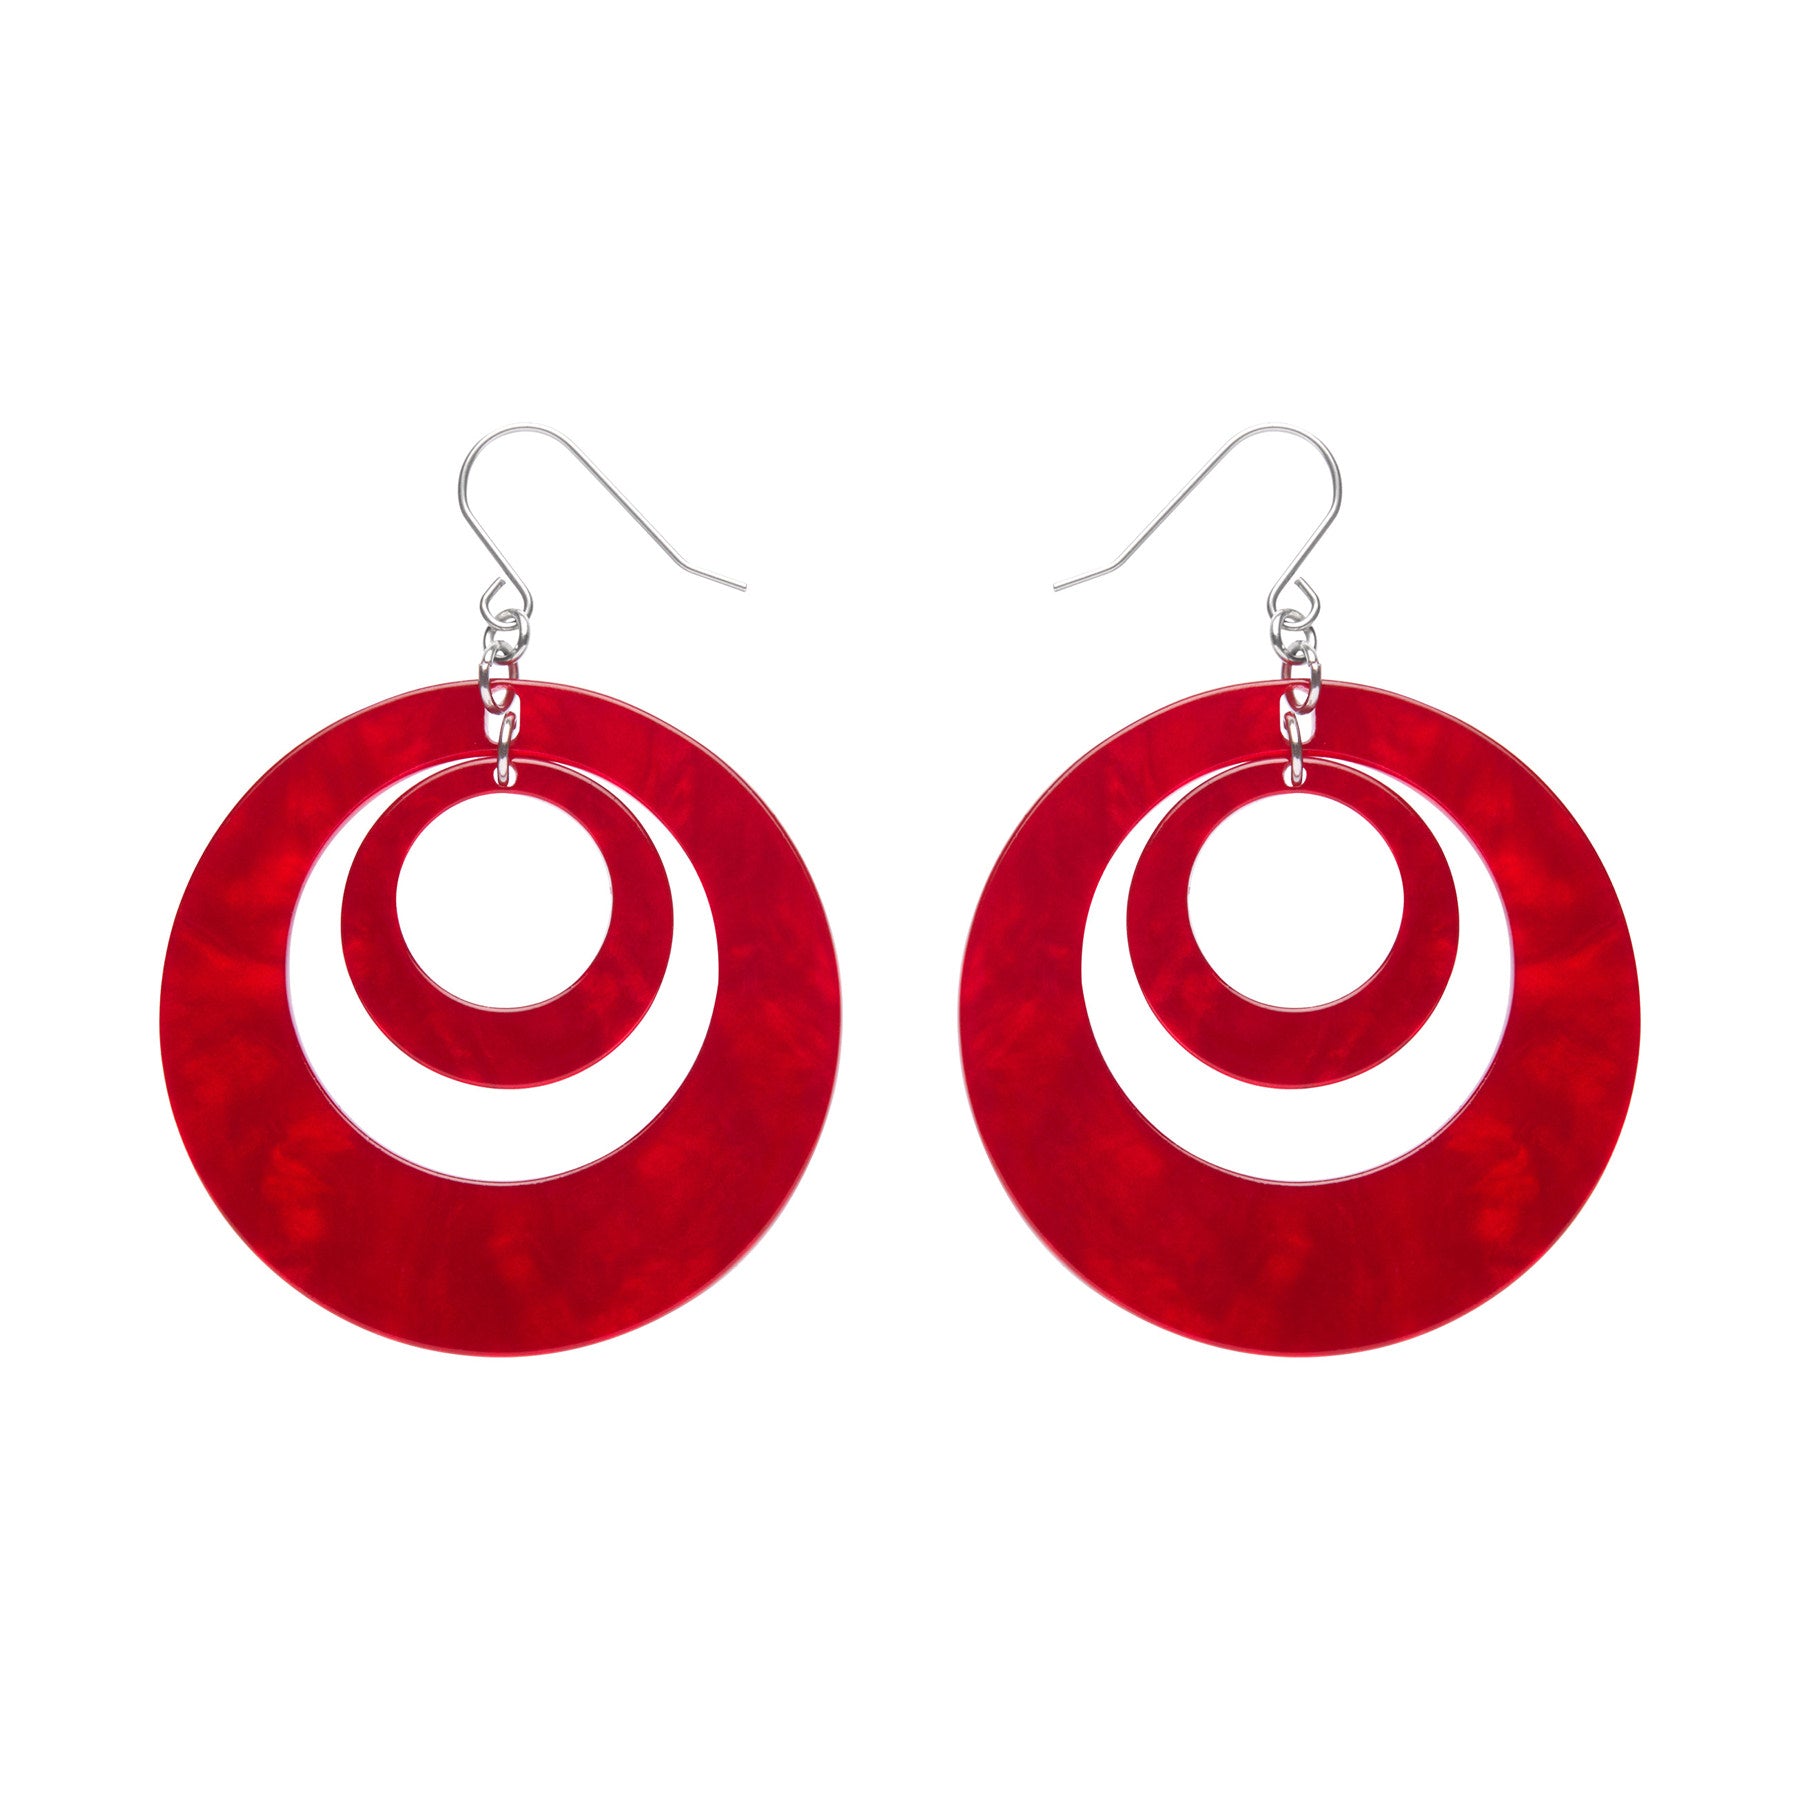 Mission to the Moon Collection double drop hoop dangle earrings in rich red ripple texture 100% Acrylic resin